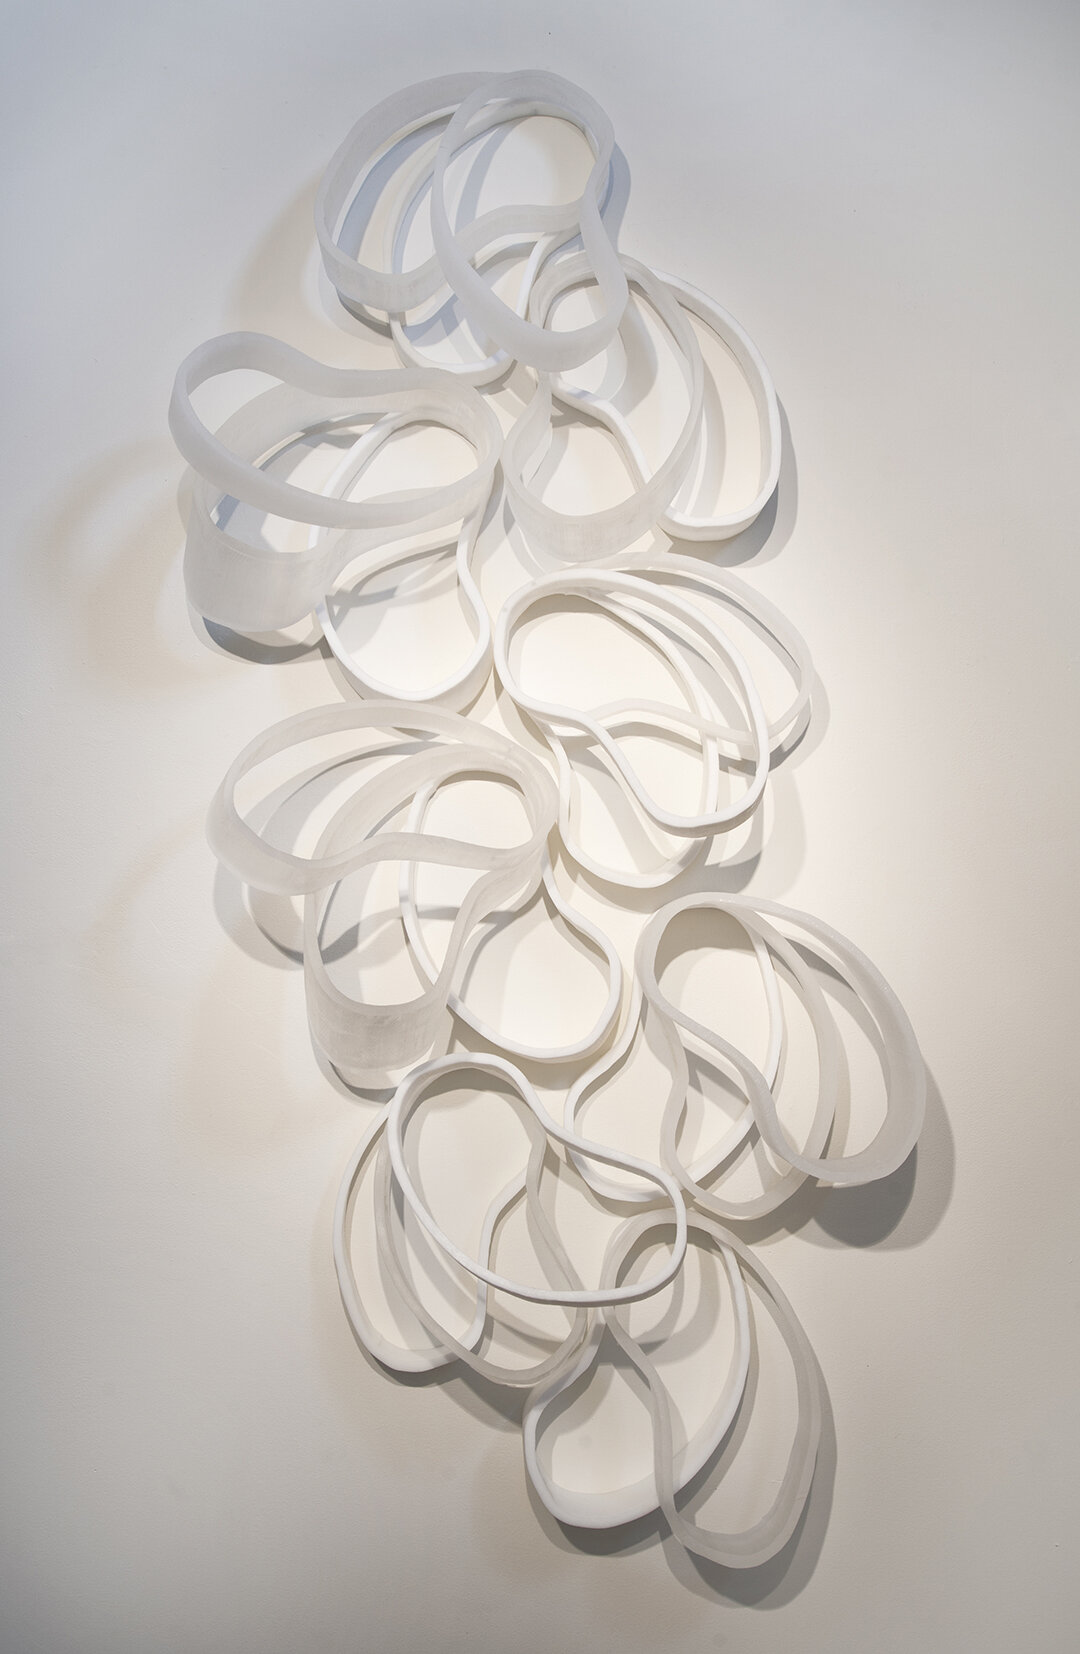 Falling Water, 2011, Cast Resin, 80 x 40 x 12 inches